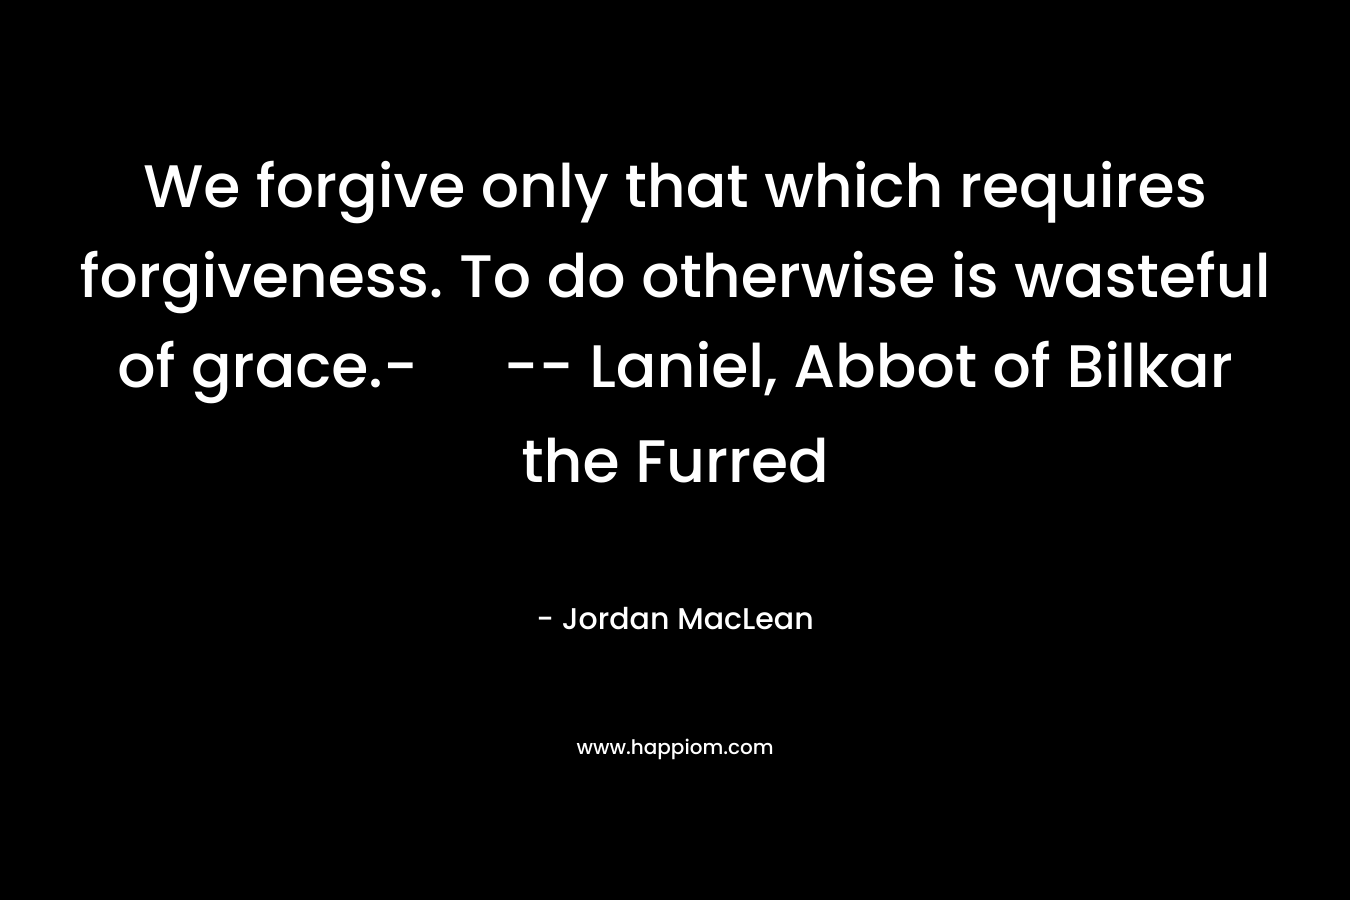 We forgive only that which requires forgiveness. To do otherwise is wasteful of grace.- — Laniel, Abbot of Bilkar the Furred – Jordan MacLean